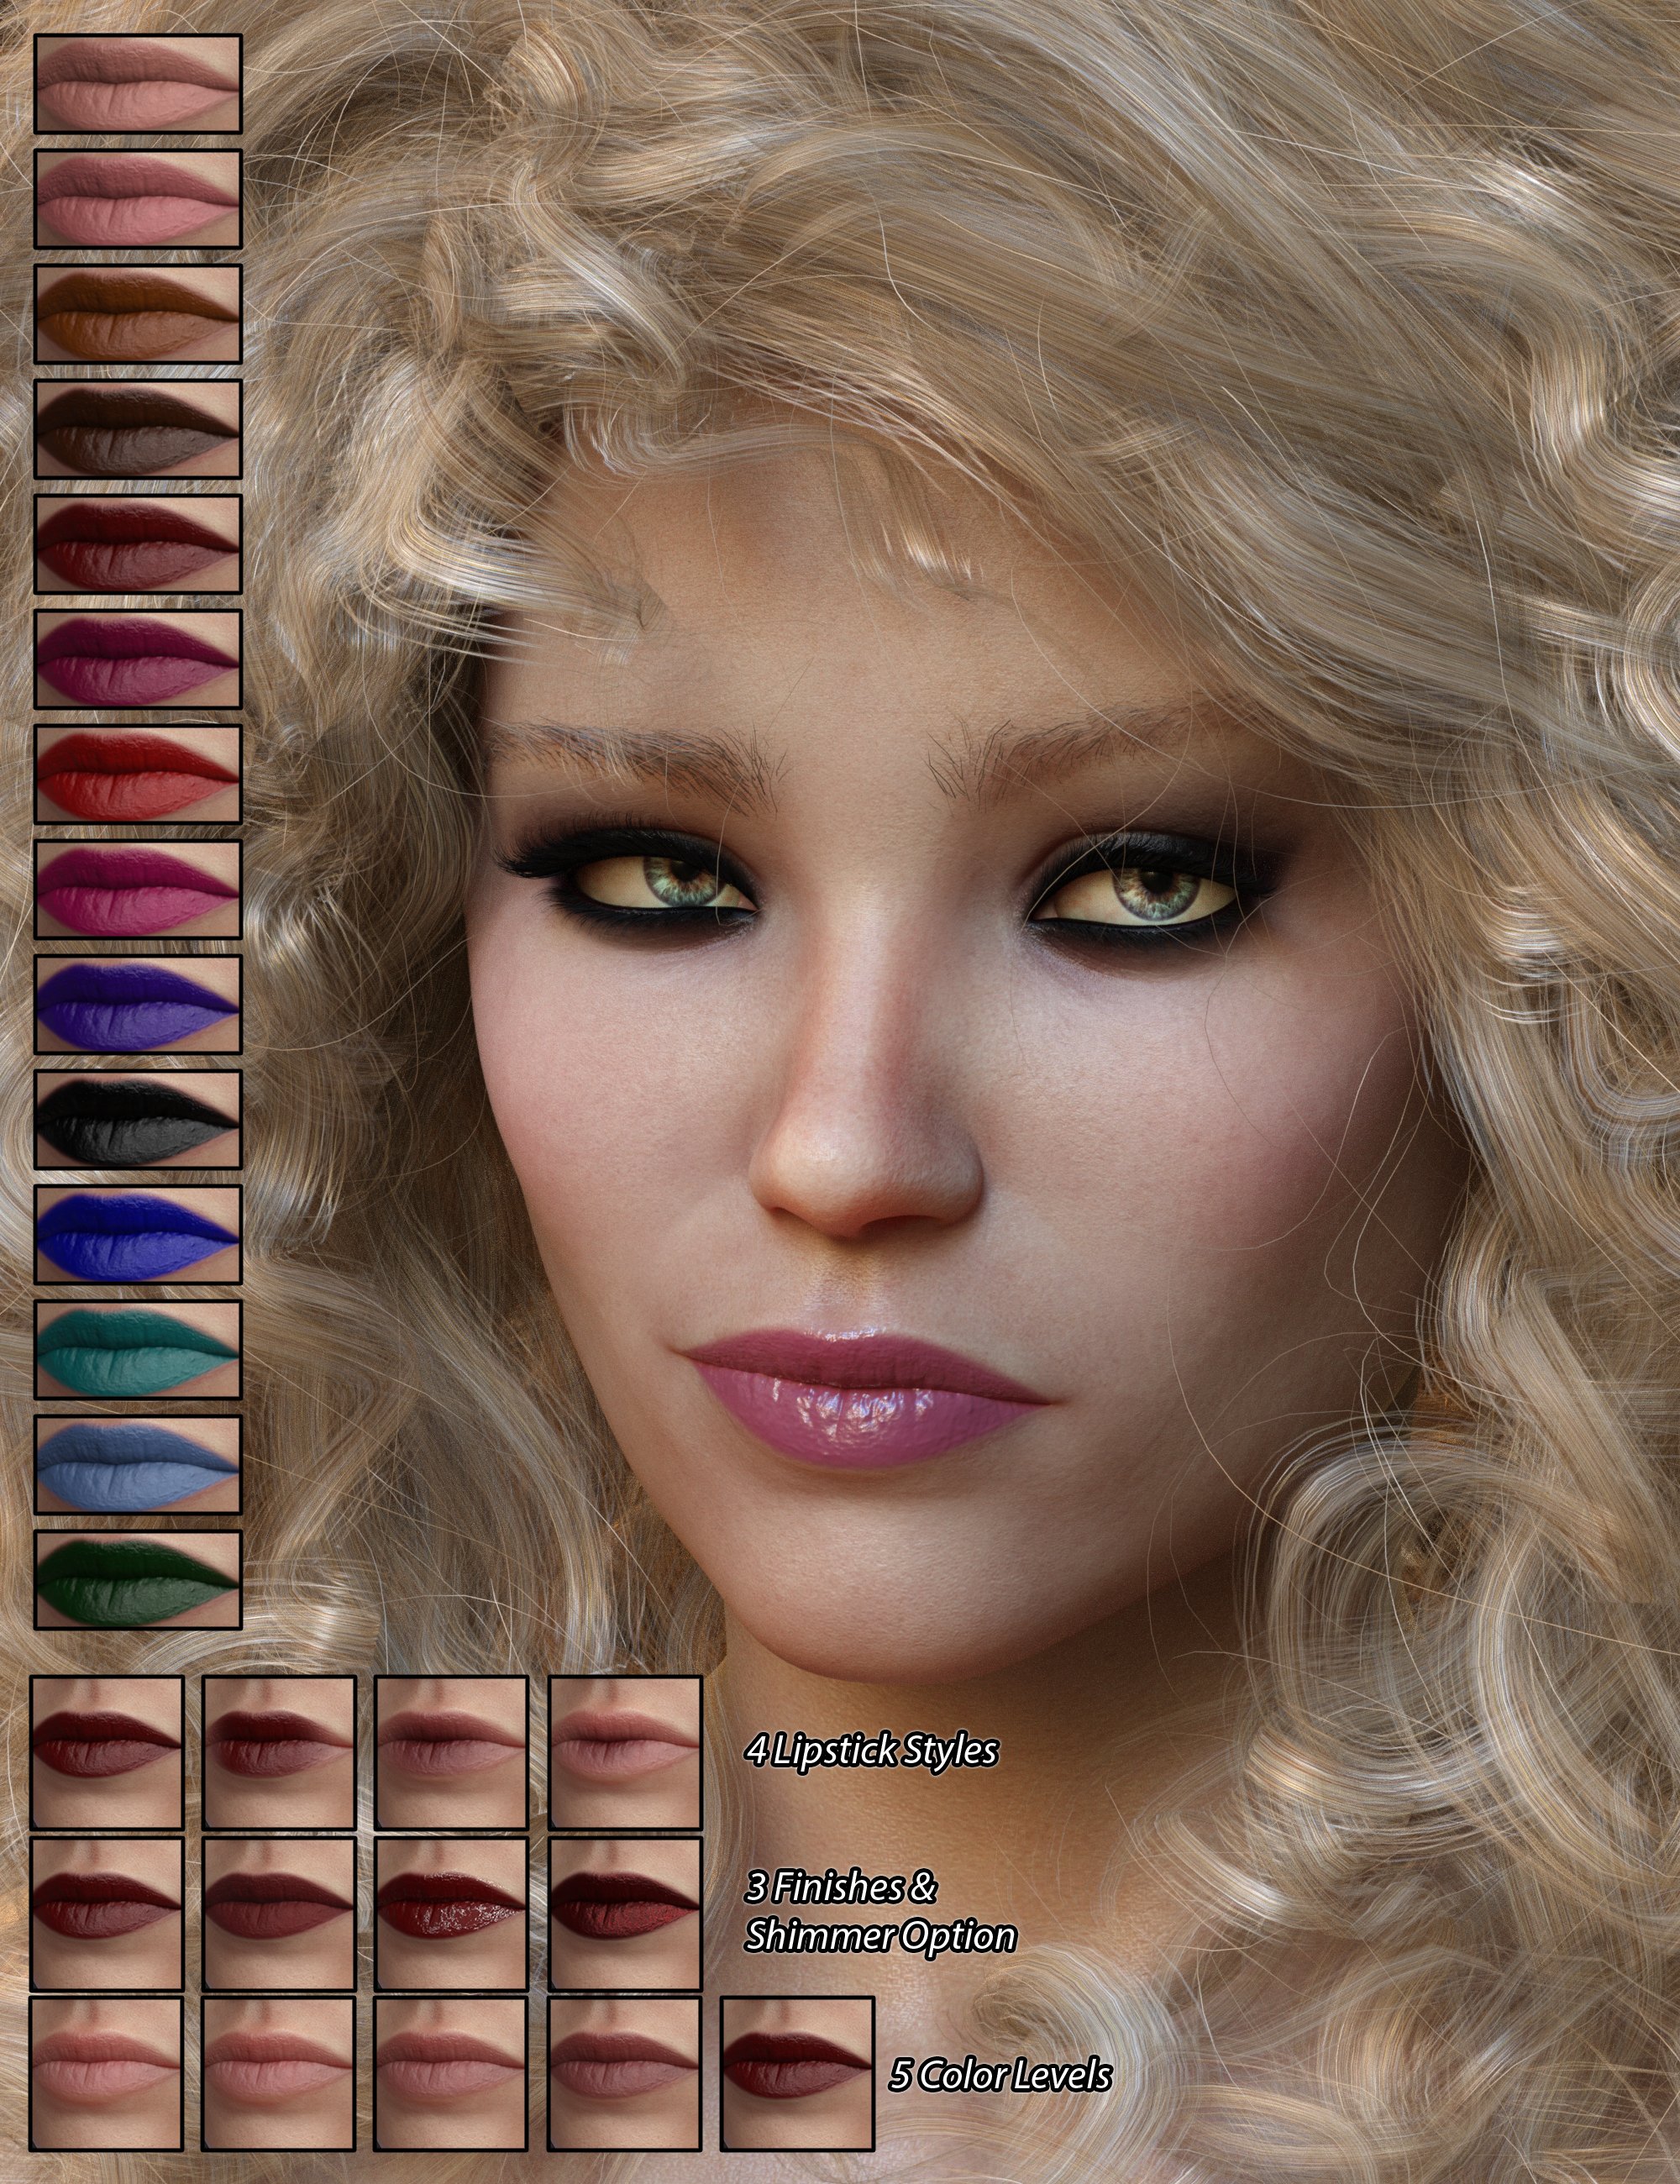 CC Aife for Angharad 8 by: ChangelingChick, 3D Models by Daz 3D